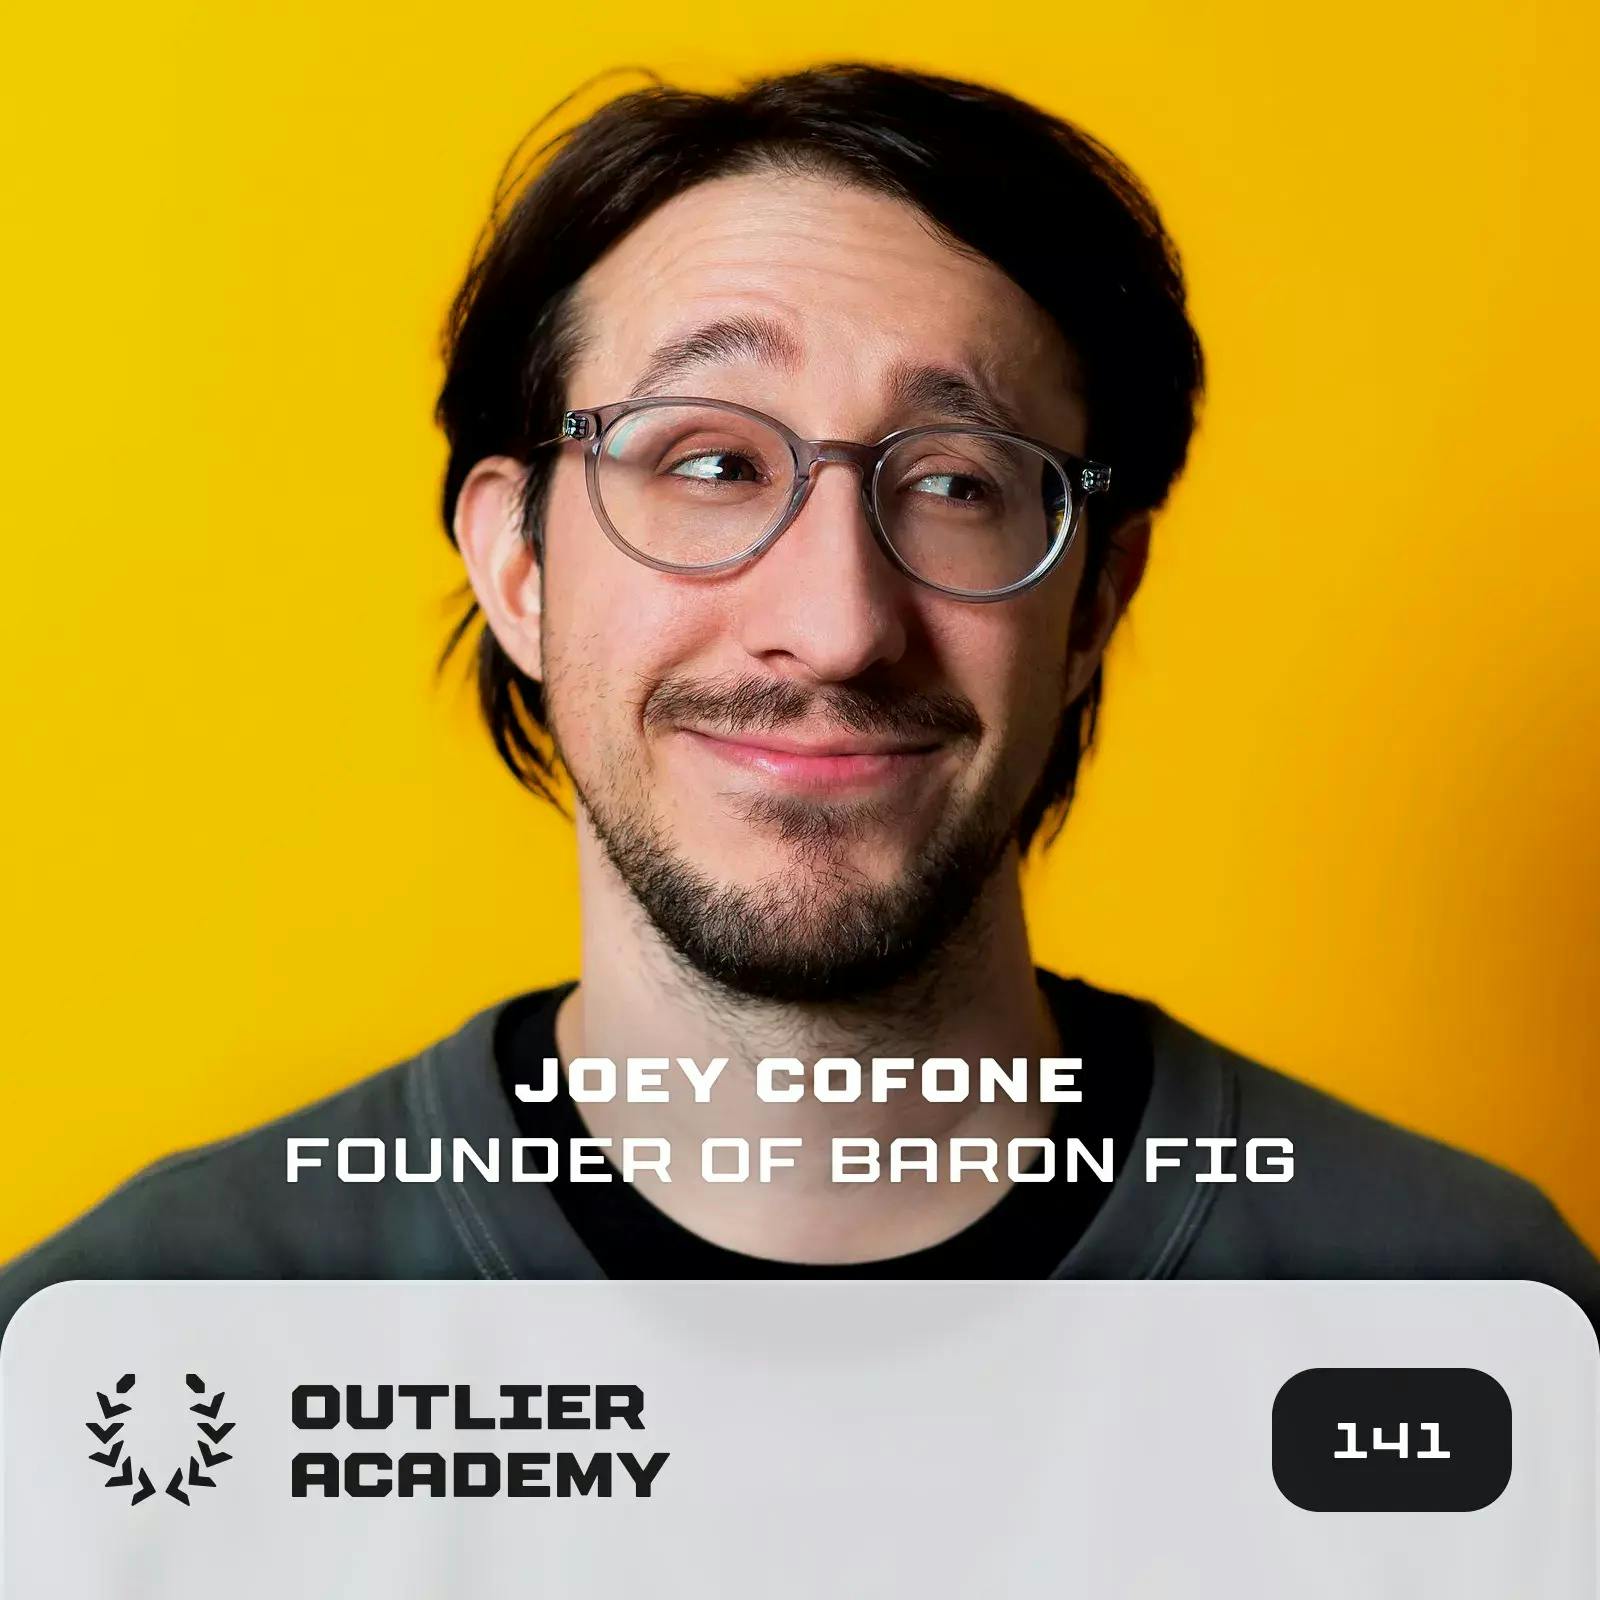 Joey Cofone, Founder & CEO of Baronfig - Favorite Baronfig Products, Skill vs Renown, Daily Disciplines, Favorite Books, and More